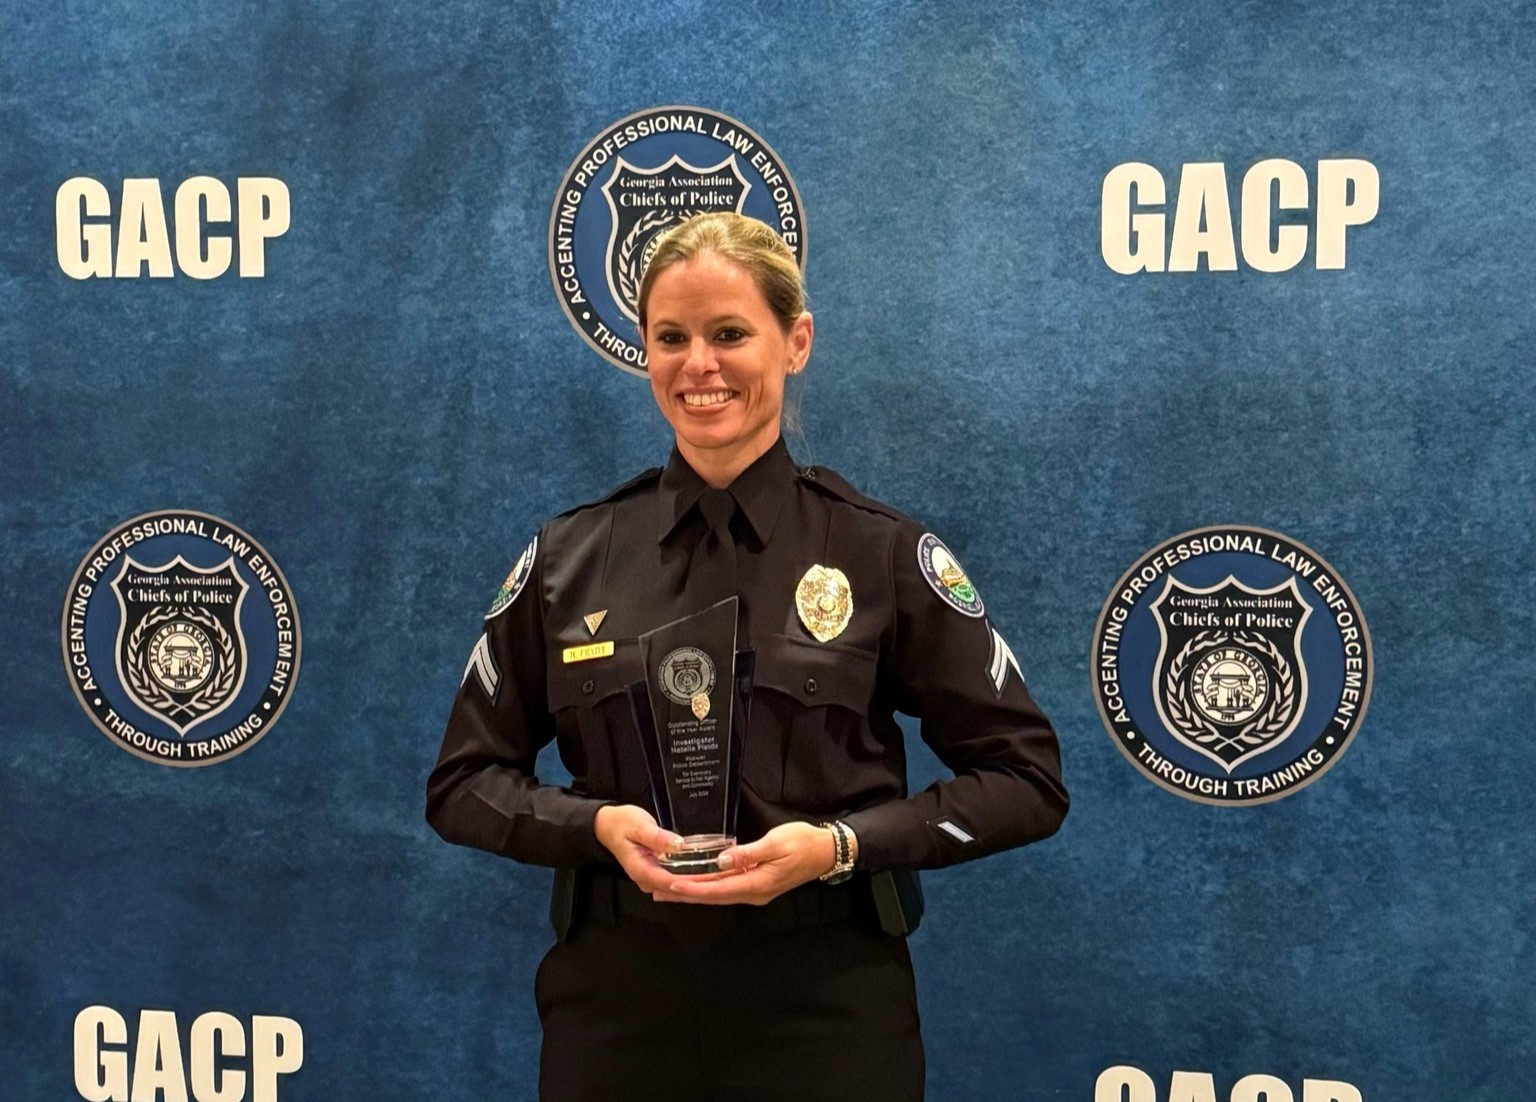 ajc.com - Henri Hollis - Roswell detective wins statewide Officer of the Year award